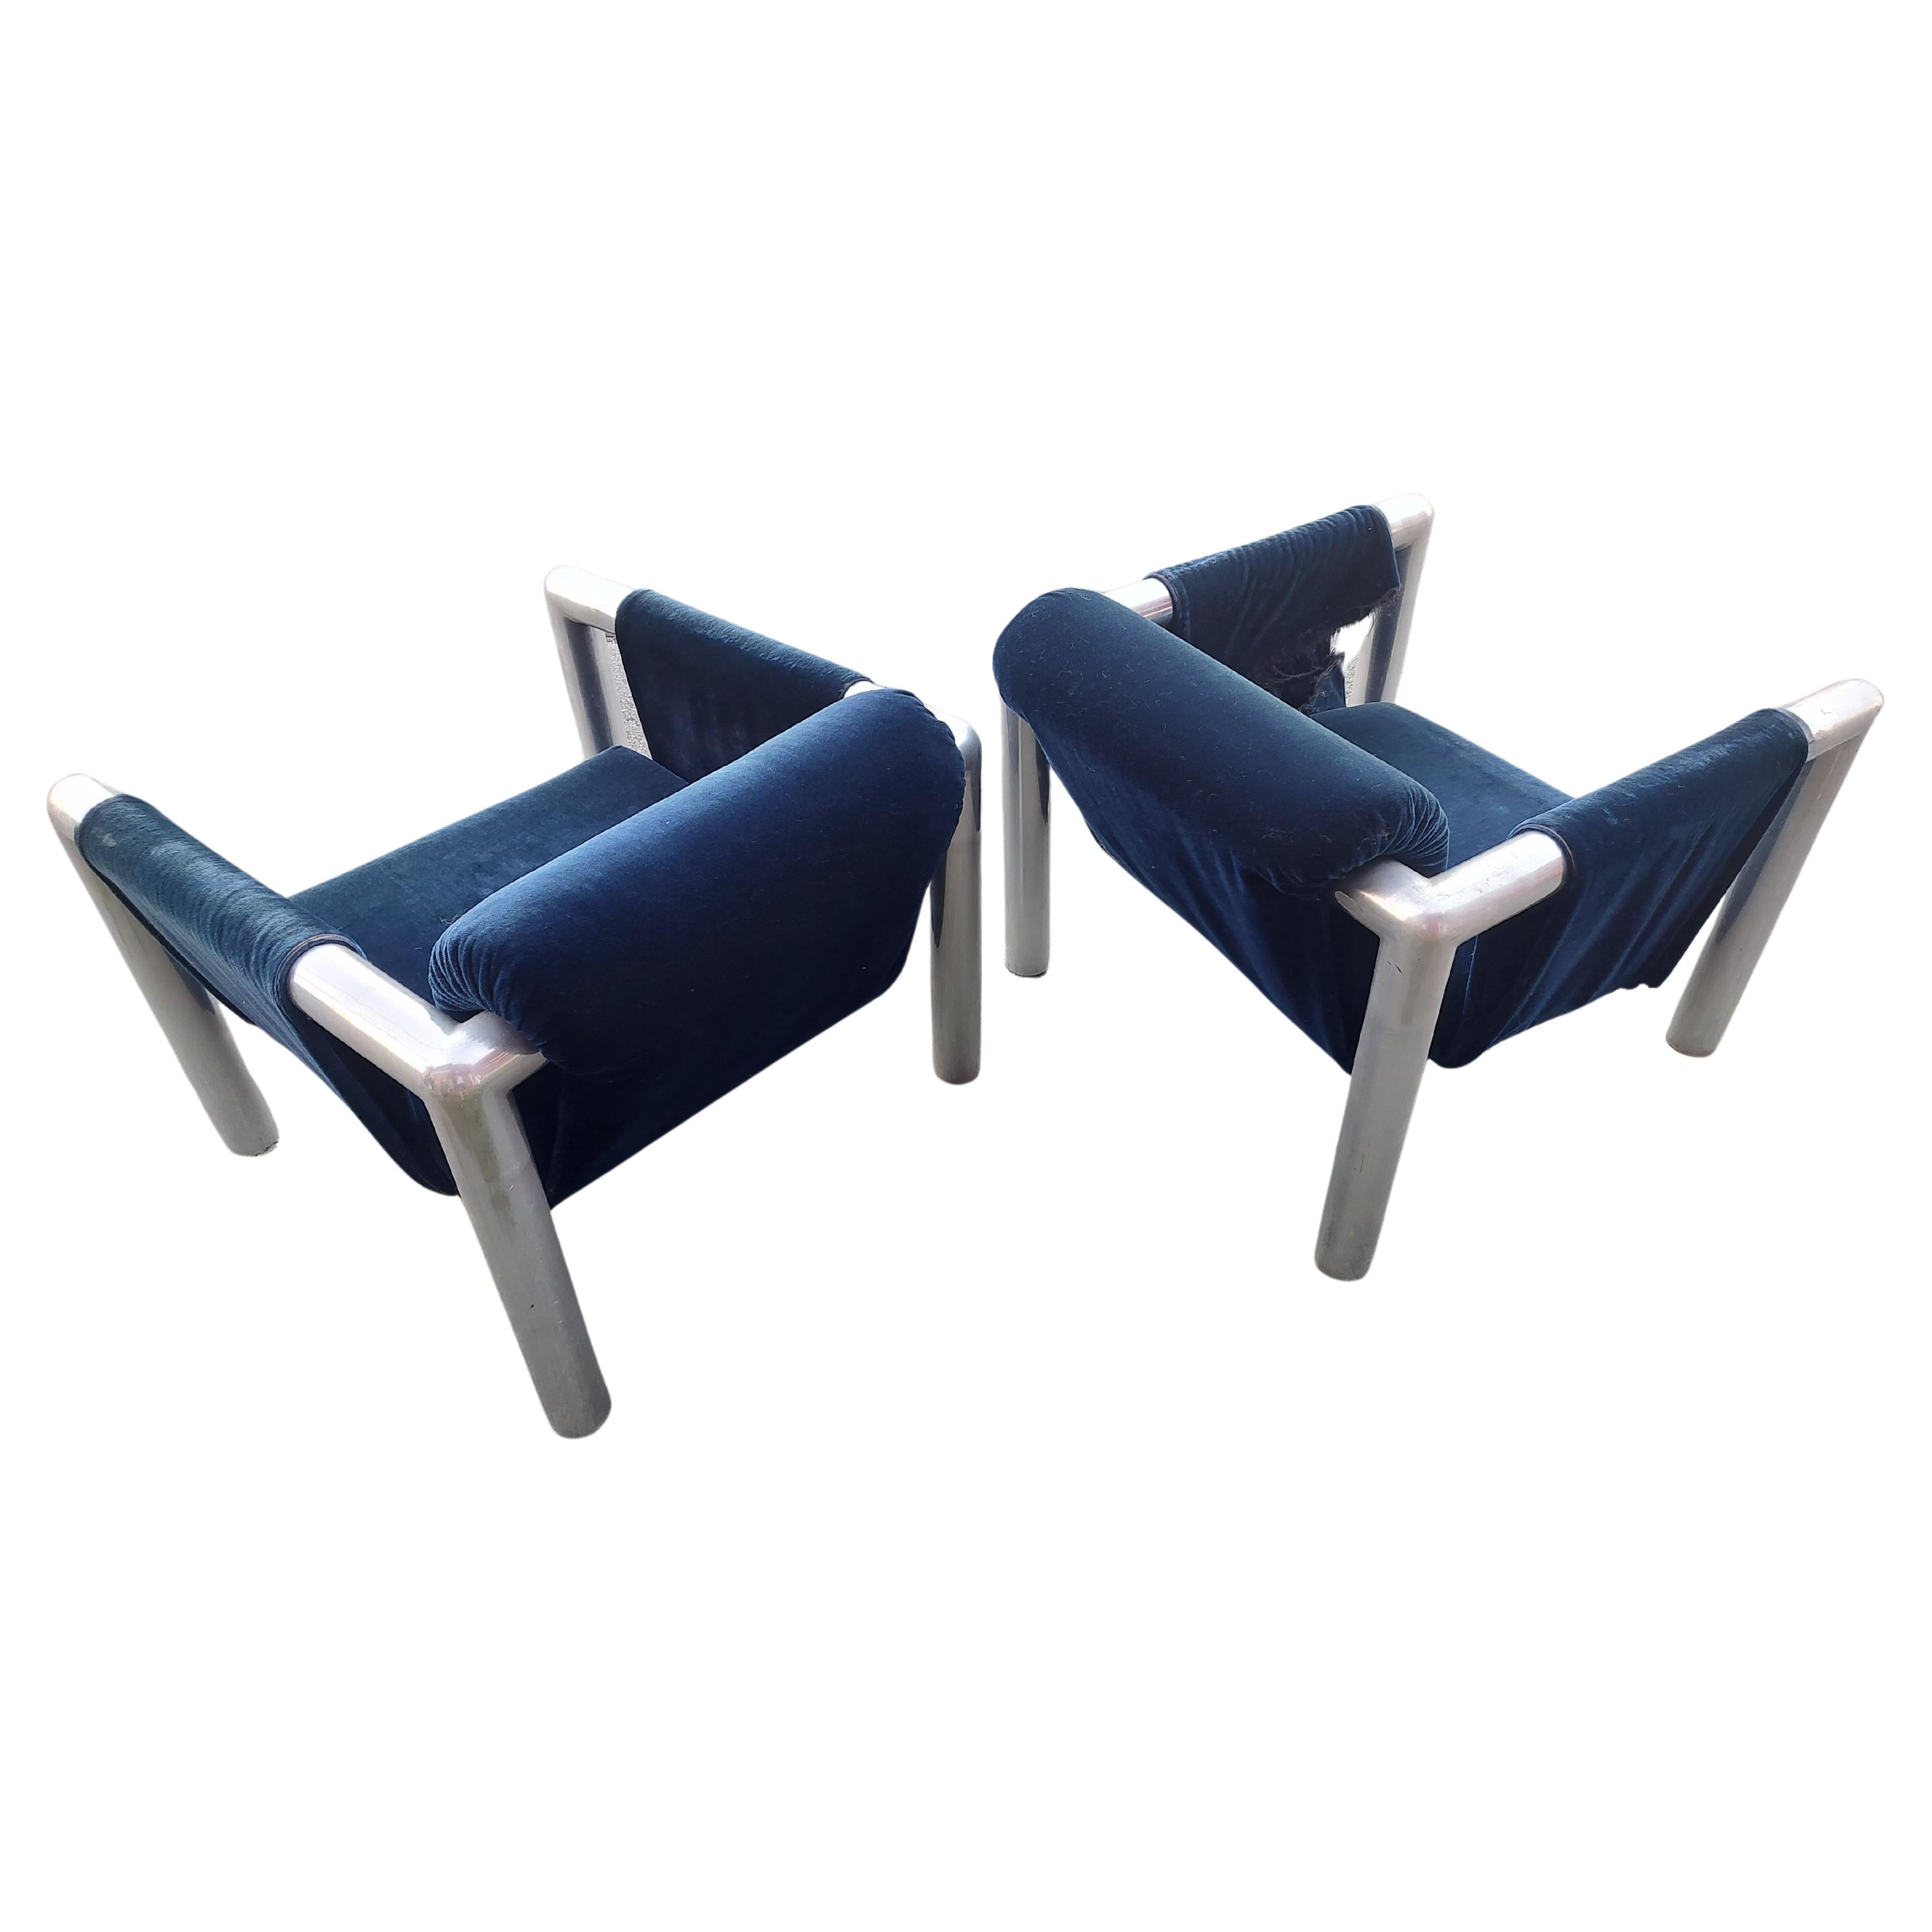 Mid-20th Century Pair of Mid-Century Modern Tubular Sling Chairs by John Mascheroni model 424 For Sale